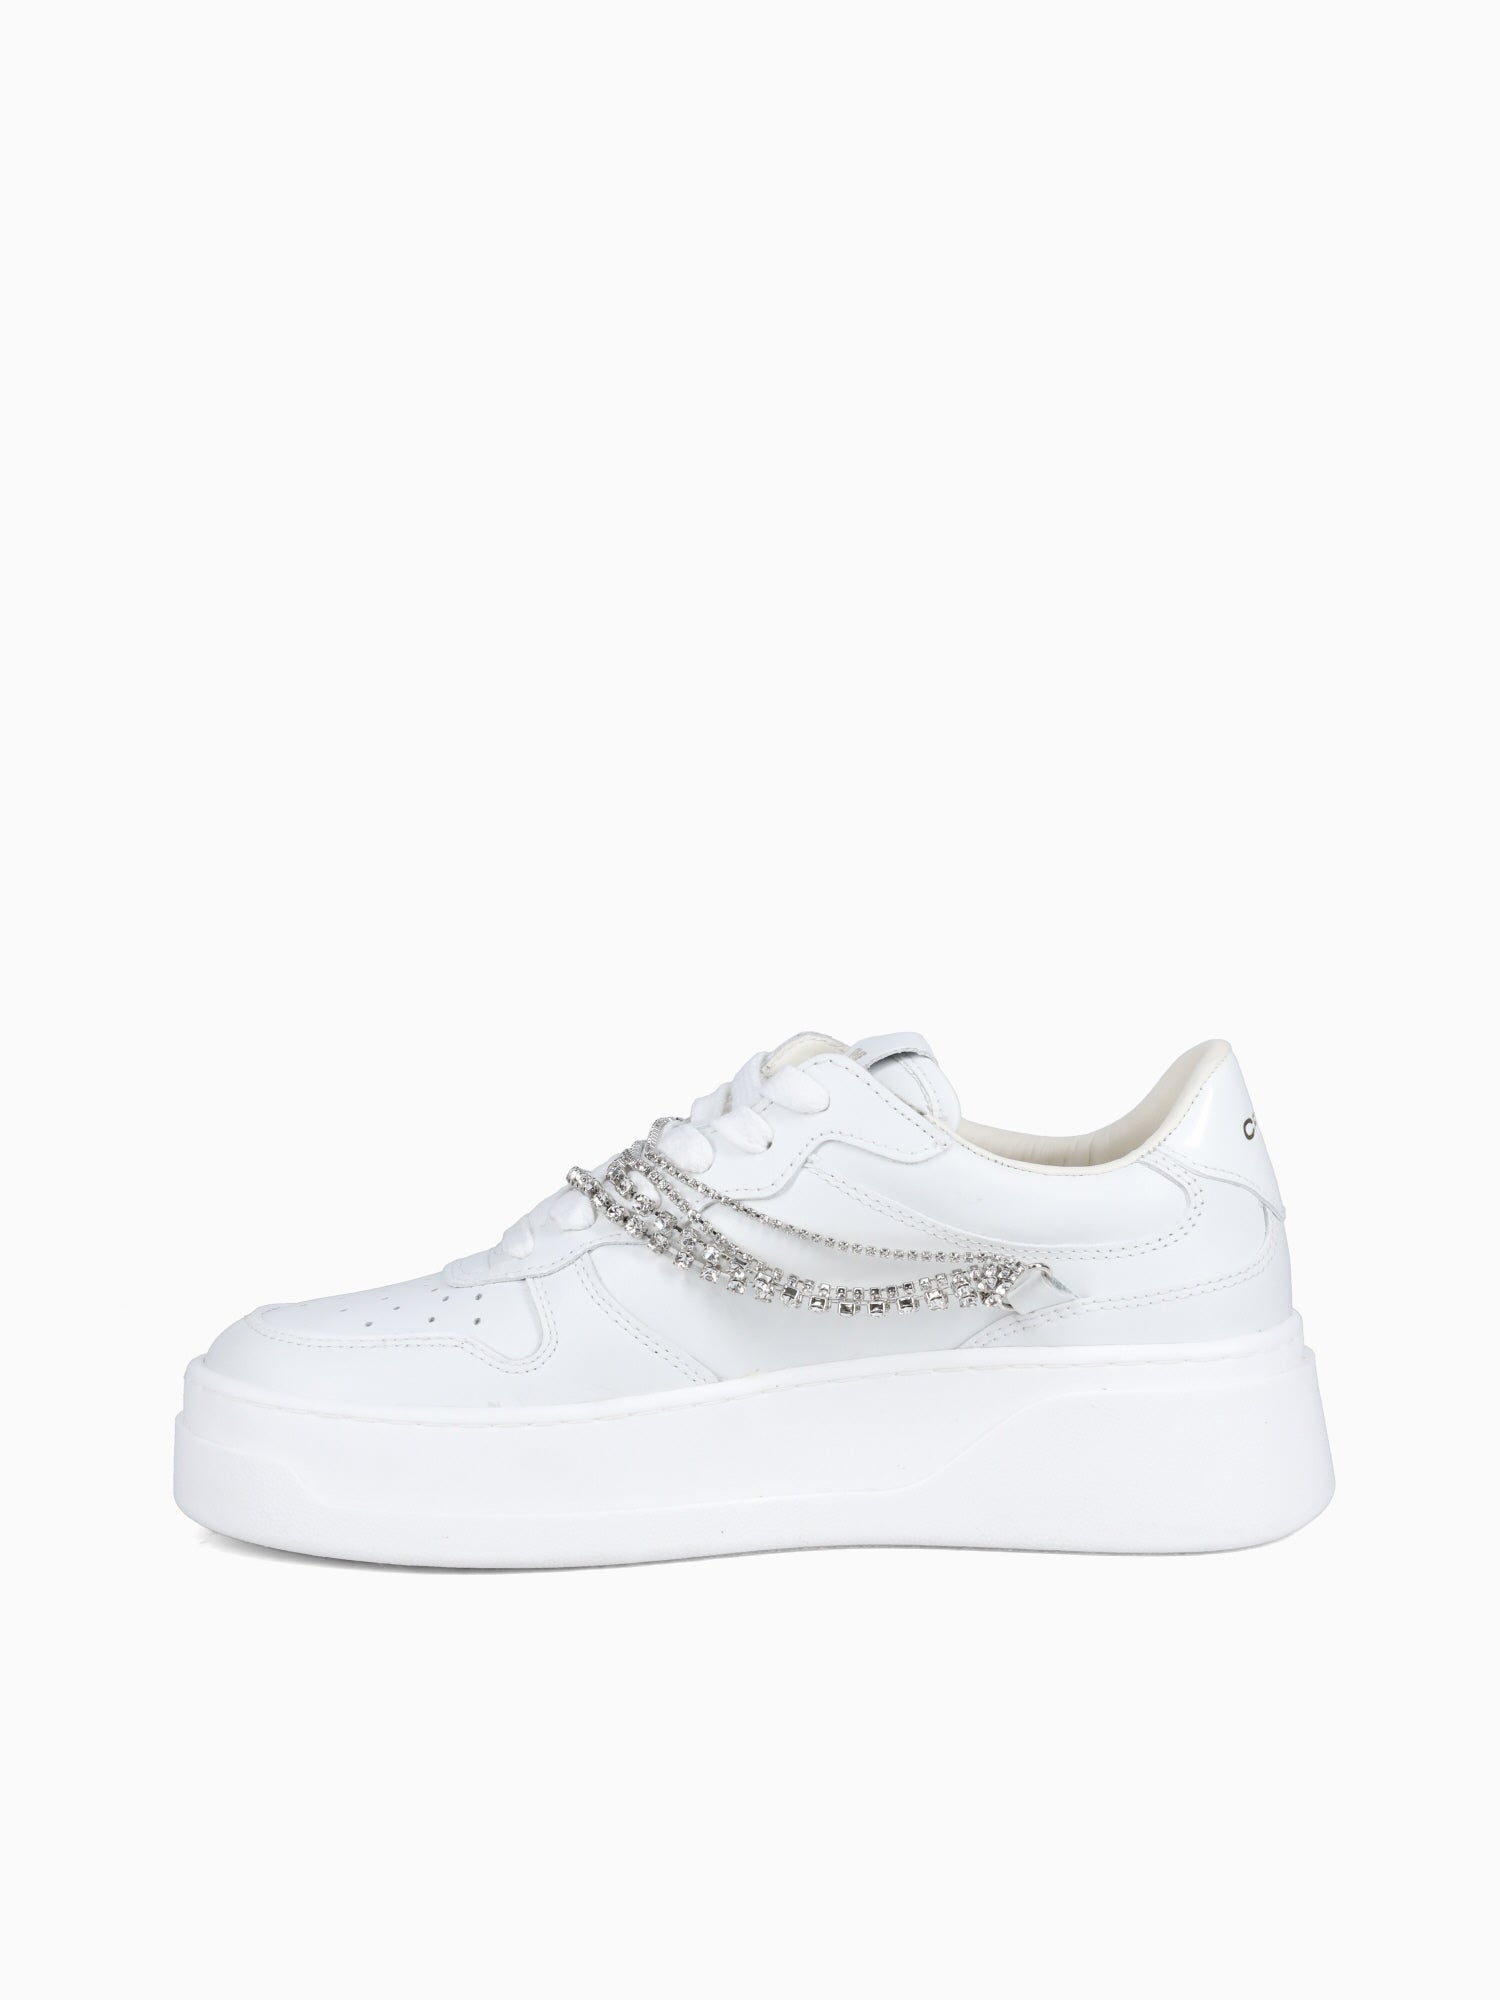 Crime Force 1 White Leather